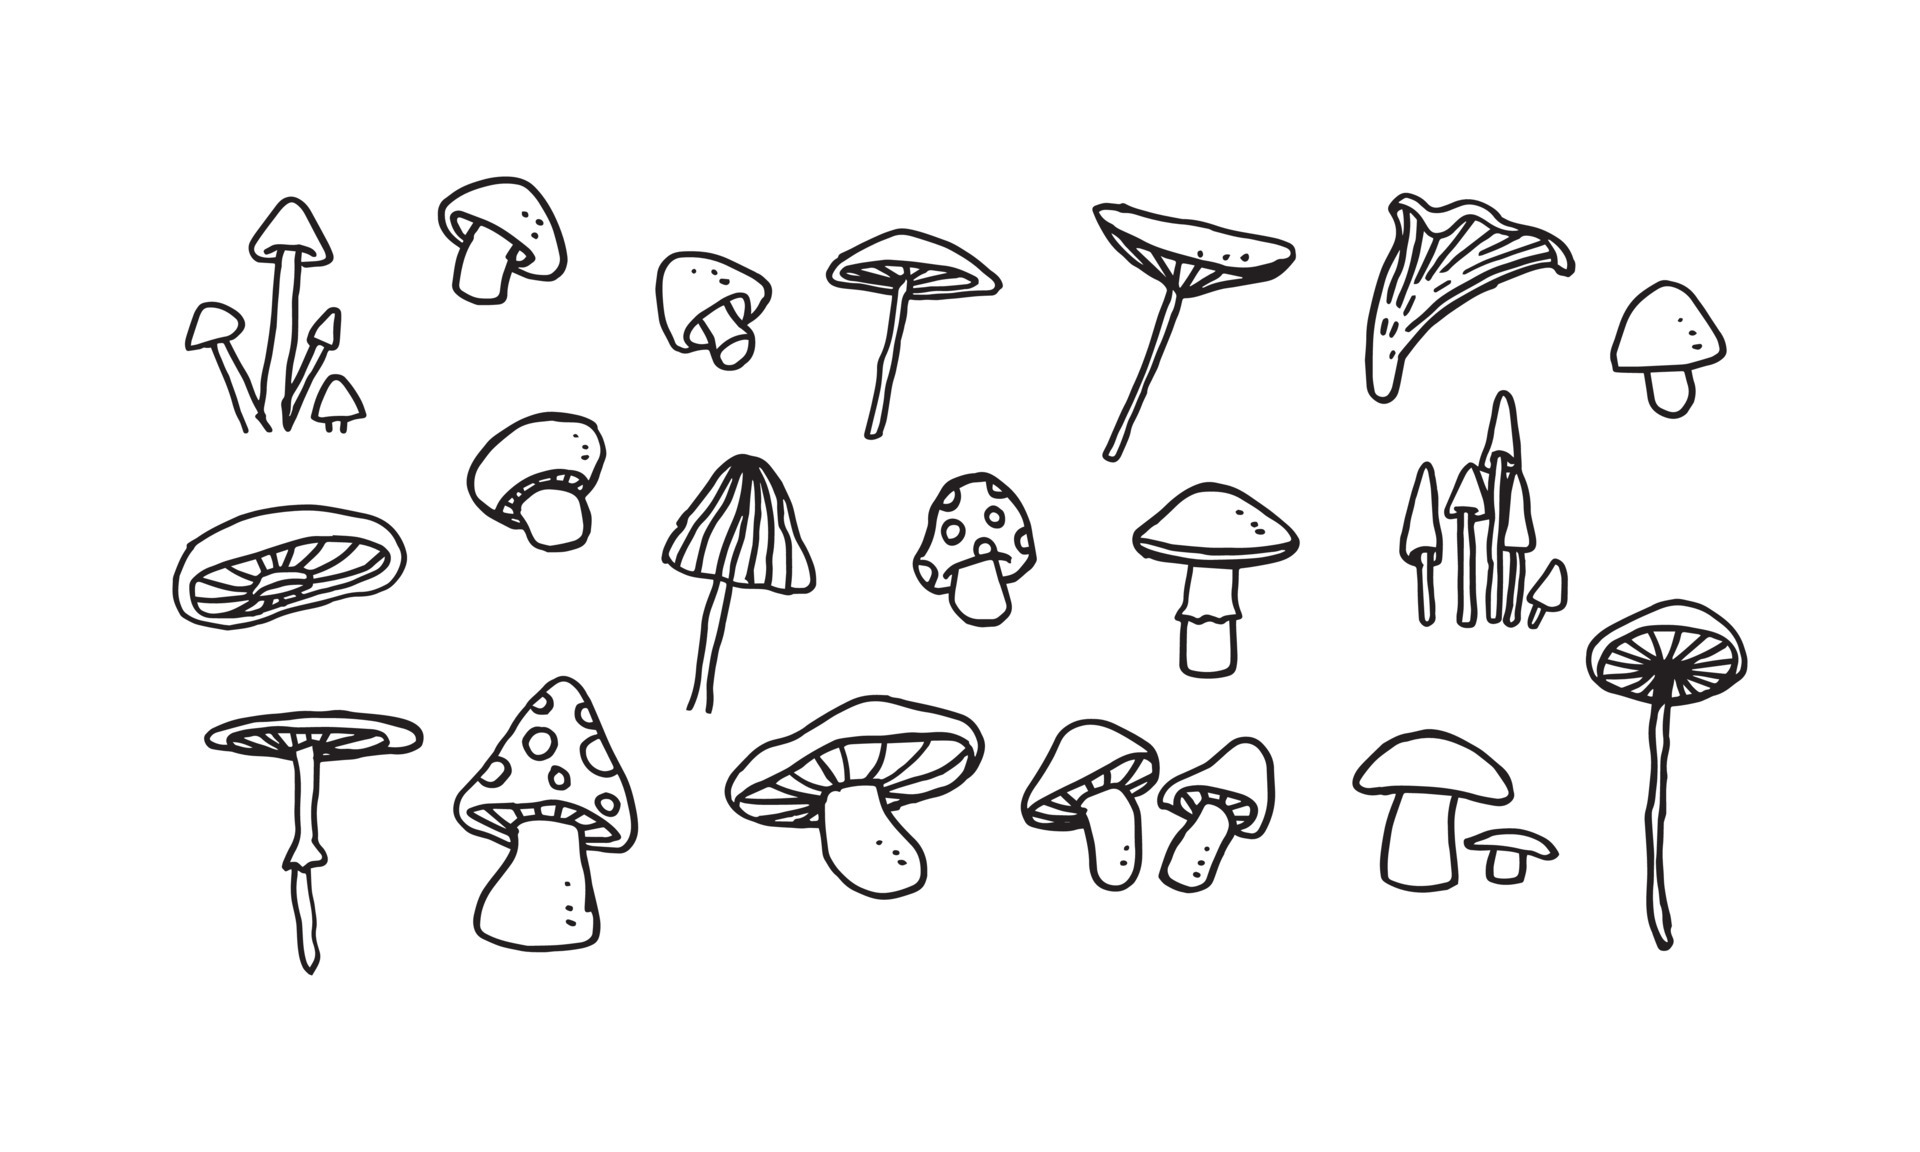 44200 Fungi Drawing Stock Photos Pictures  RoyaltyFree Images  iStock